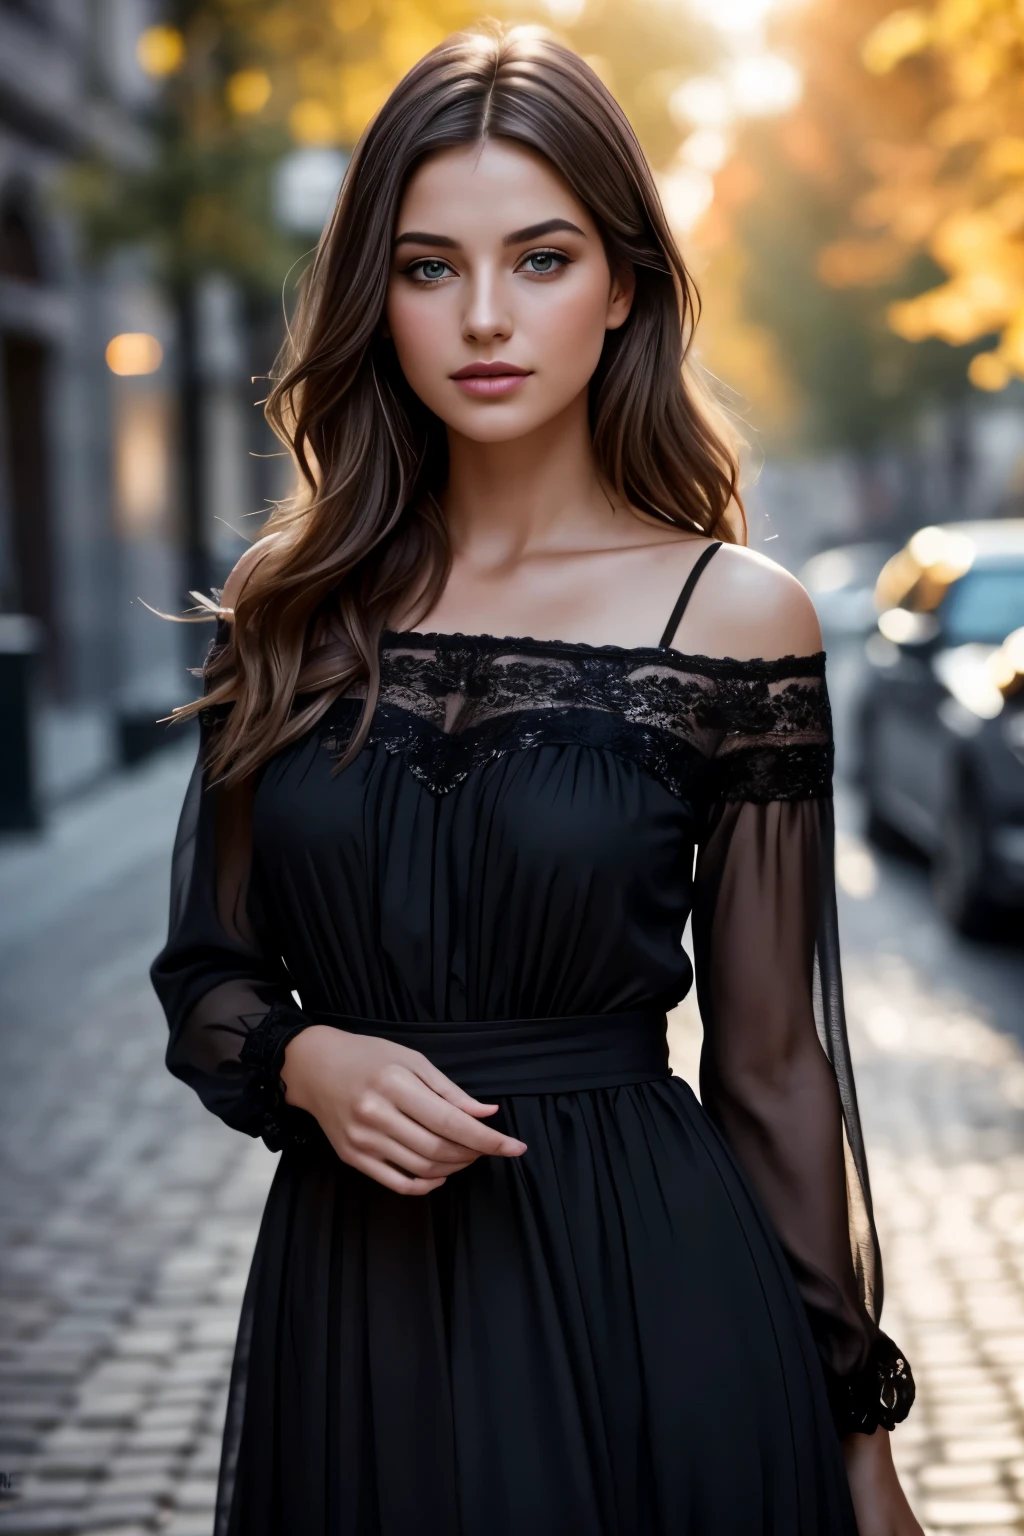 (keen focus:1.2), photoshot, attractive young KariSweetebeautiful face:1.1), Detailed dark brown eyes, luscious lips, (cat eye makeup:0.85), (smil:1.2), wearing (gown:1.2) on a (Daily Street:1.2). (Atmospheric, sunny lighting:1.2), Depth of field, bokeh, 4K, HDR. by (James C. Christensen:1.2|Jeremy Lipking:1.1).